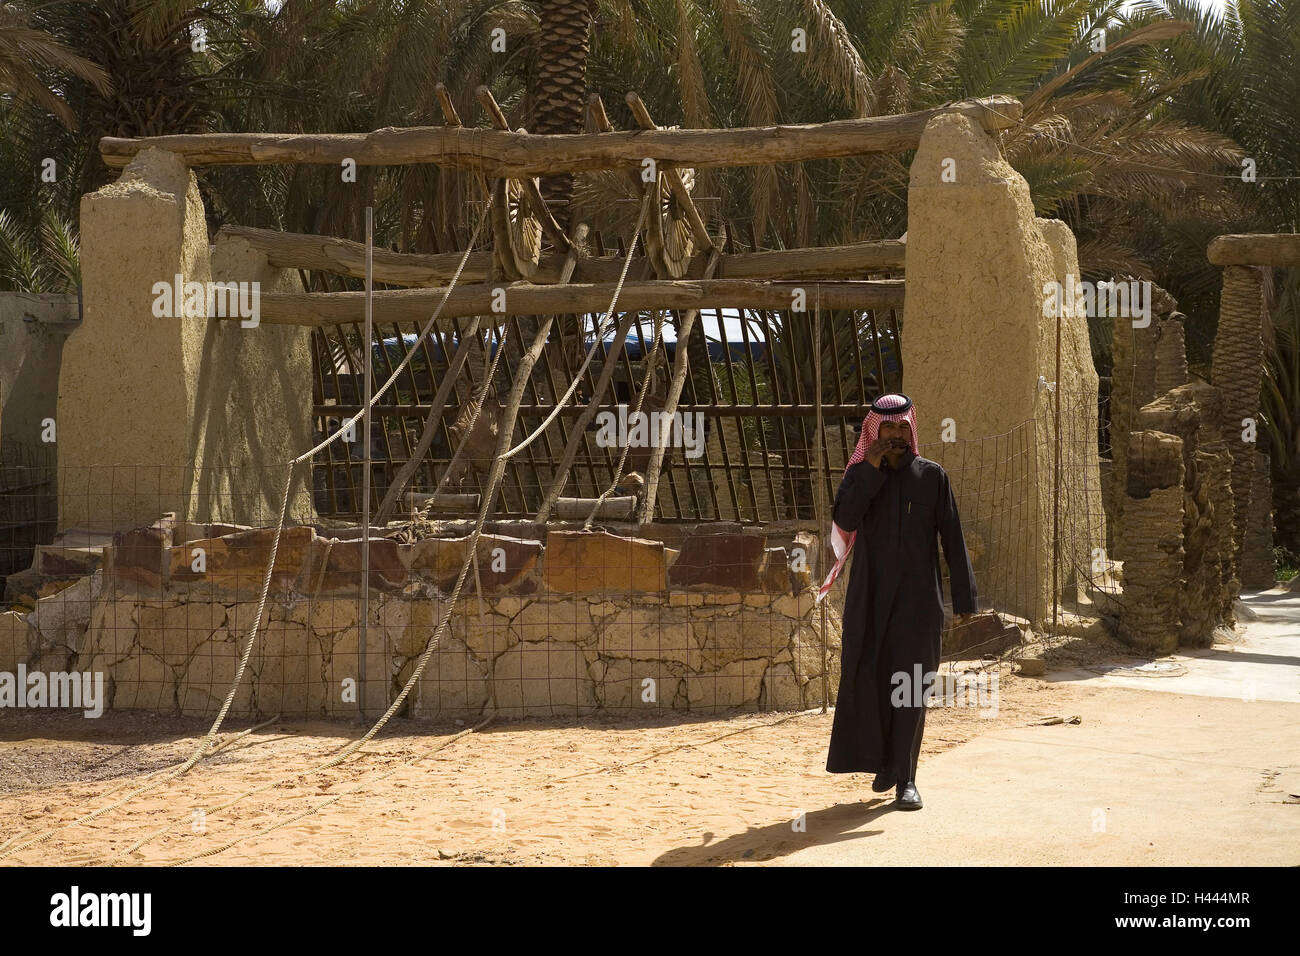 Saudi Arabia, tablespoon Naif, museum area, fountain, man, museum, uncovered area, outside area, well, well, person, Arab, passer-by, headgear, place of interest, destination, tourism, Stock Photo